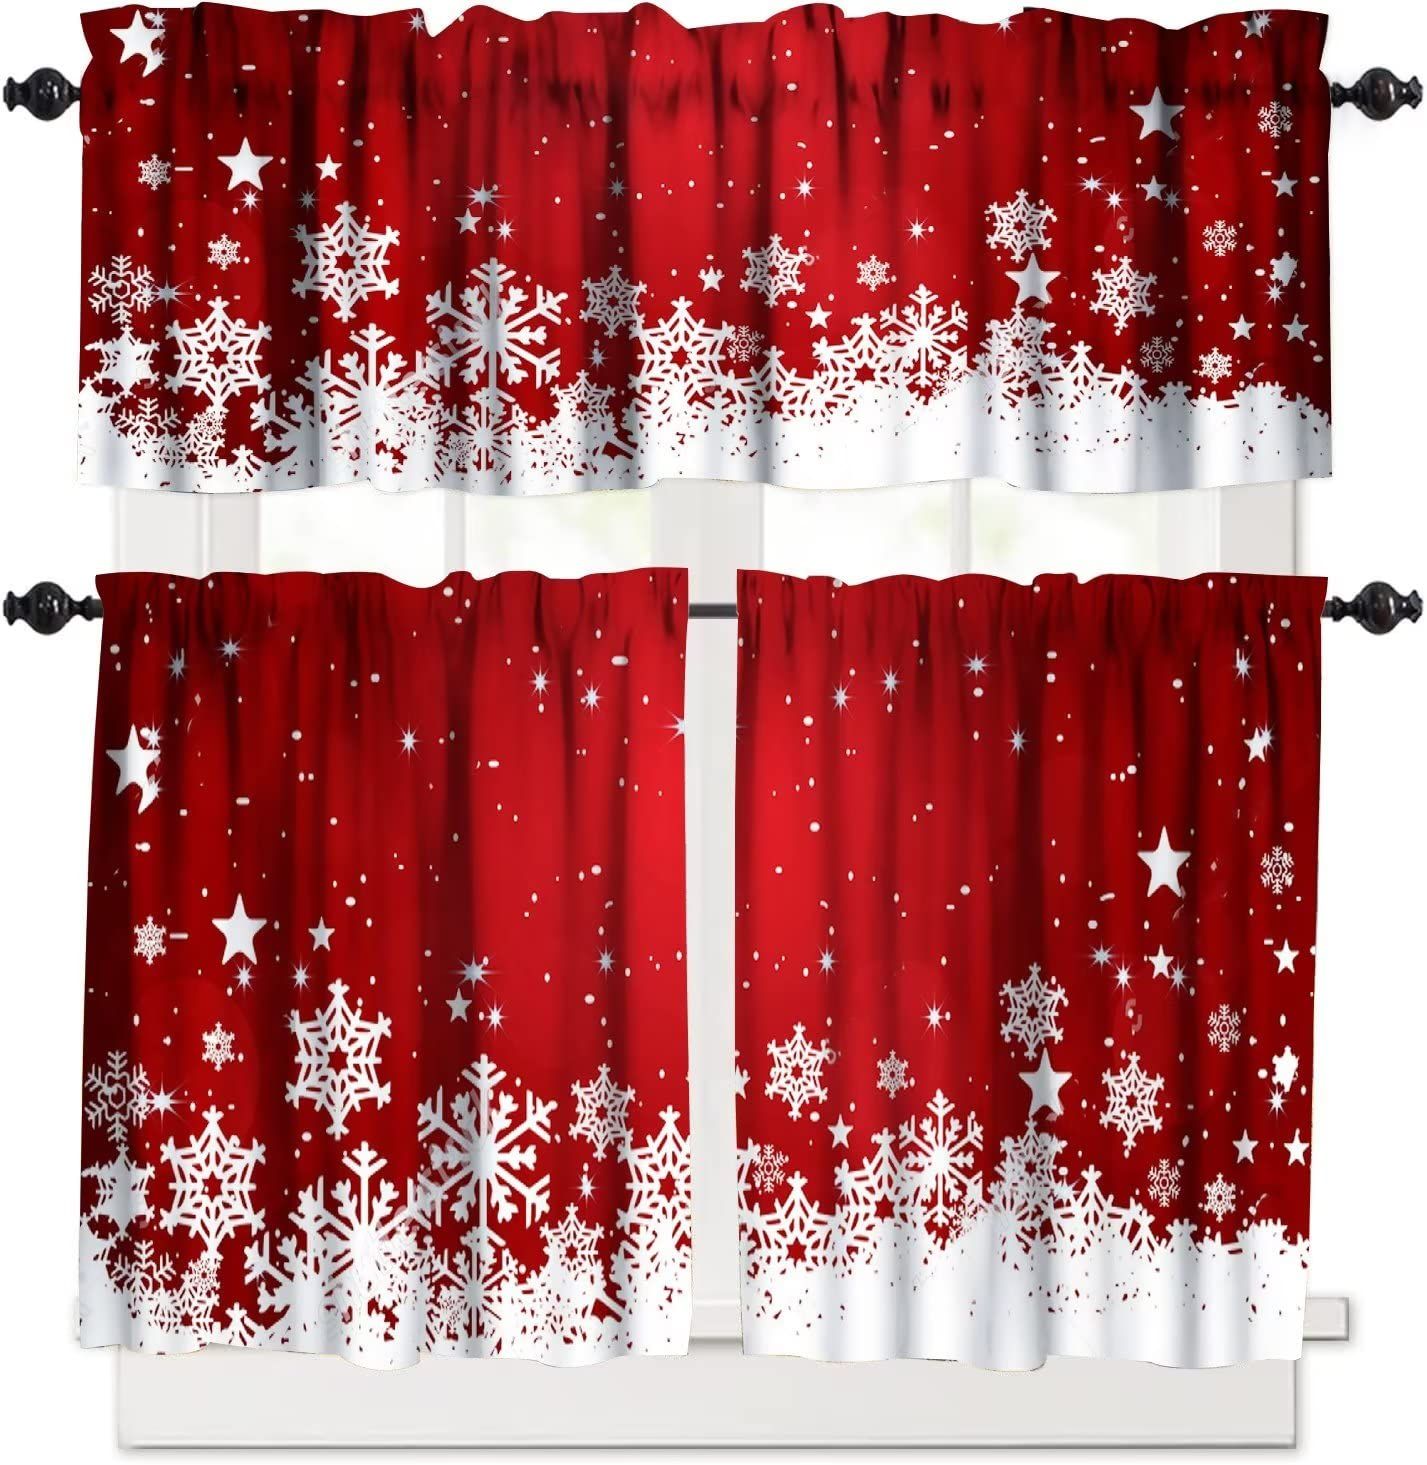 Deck the Halls with Christmas Curtains for Windows: Add Festive Flair to Your Home Decor